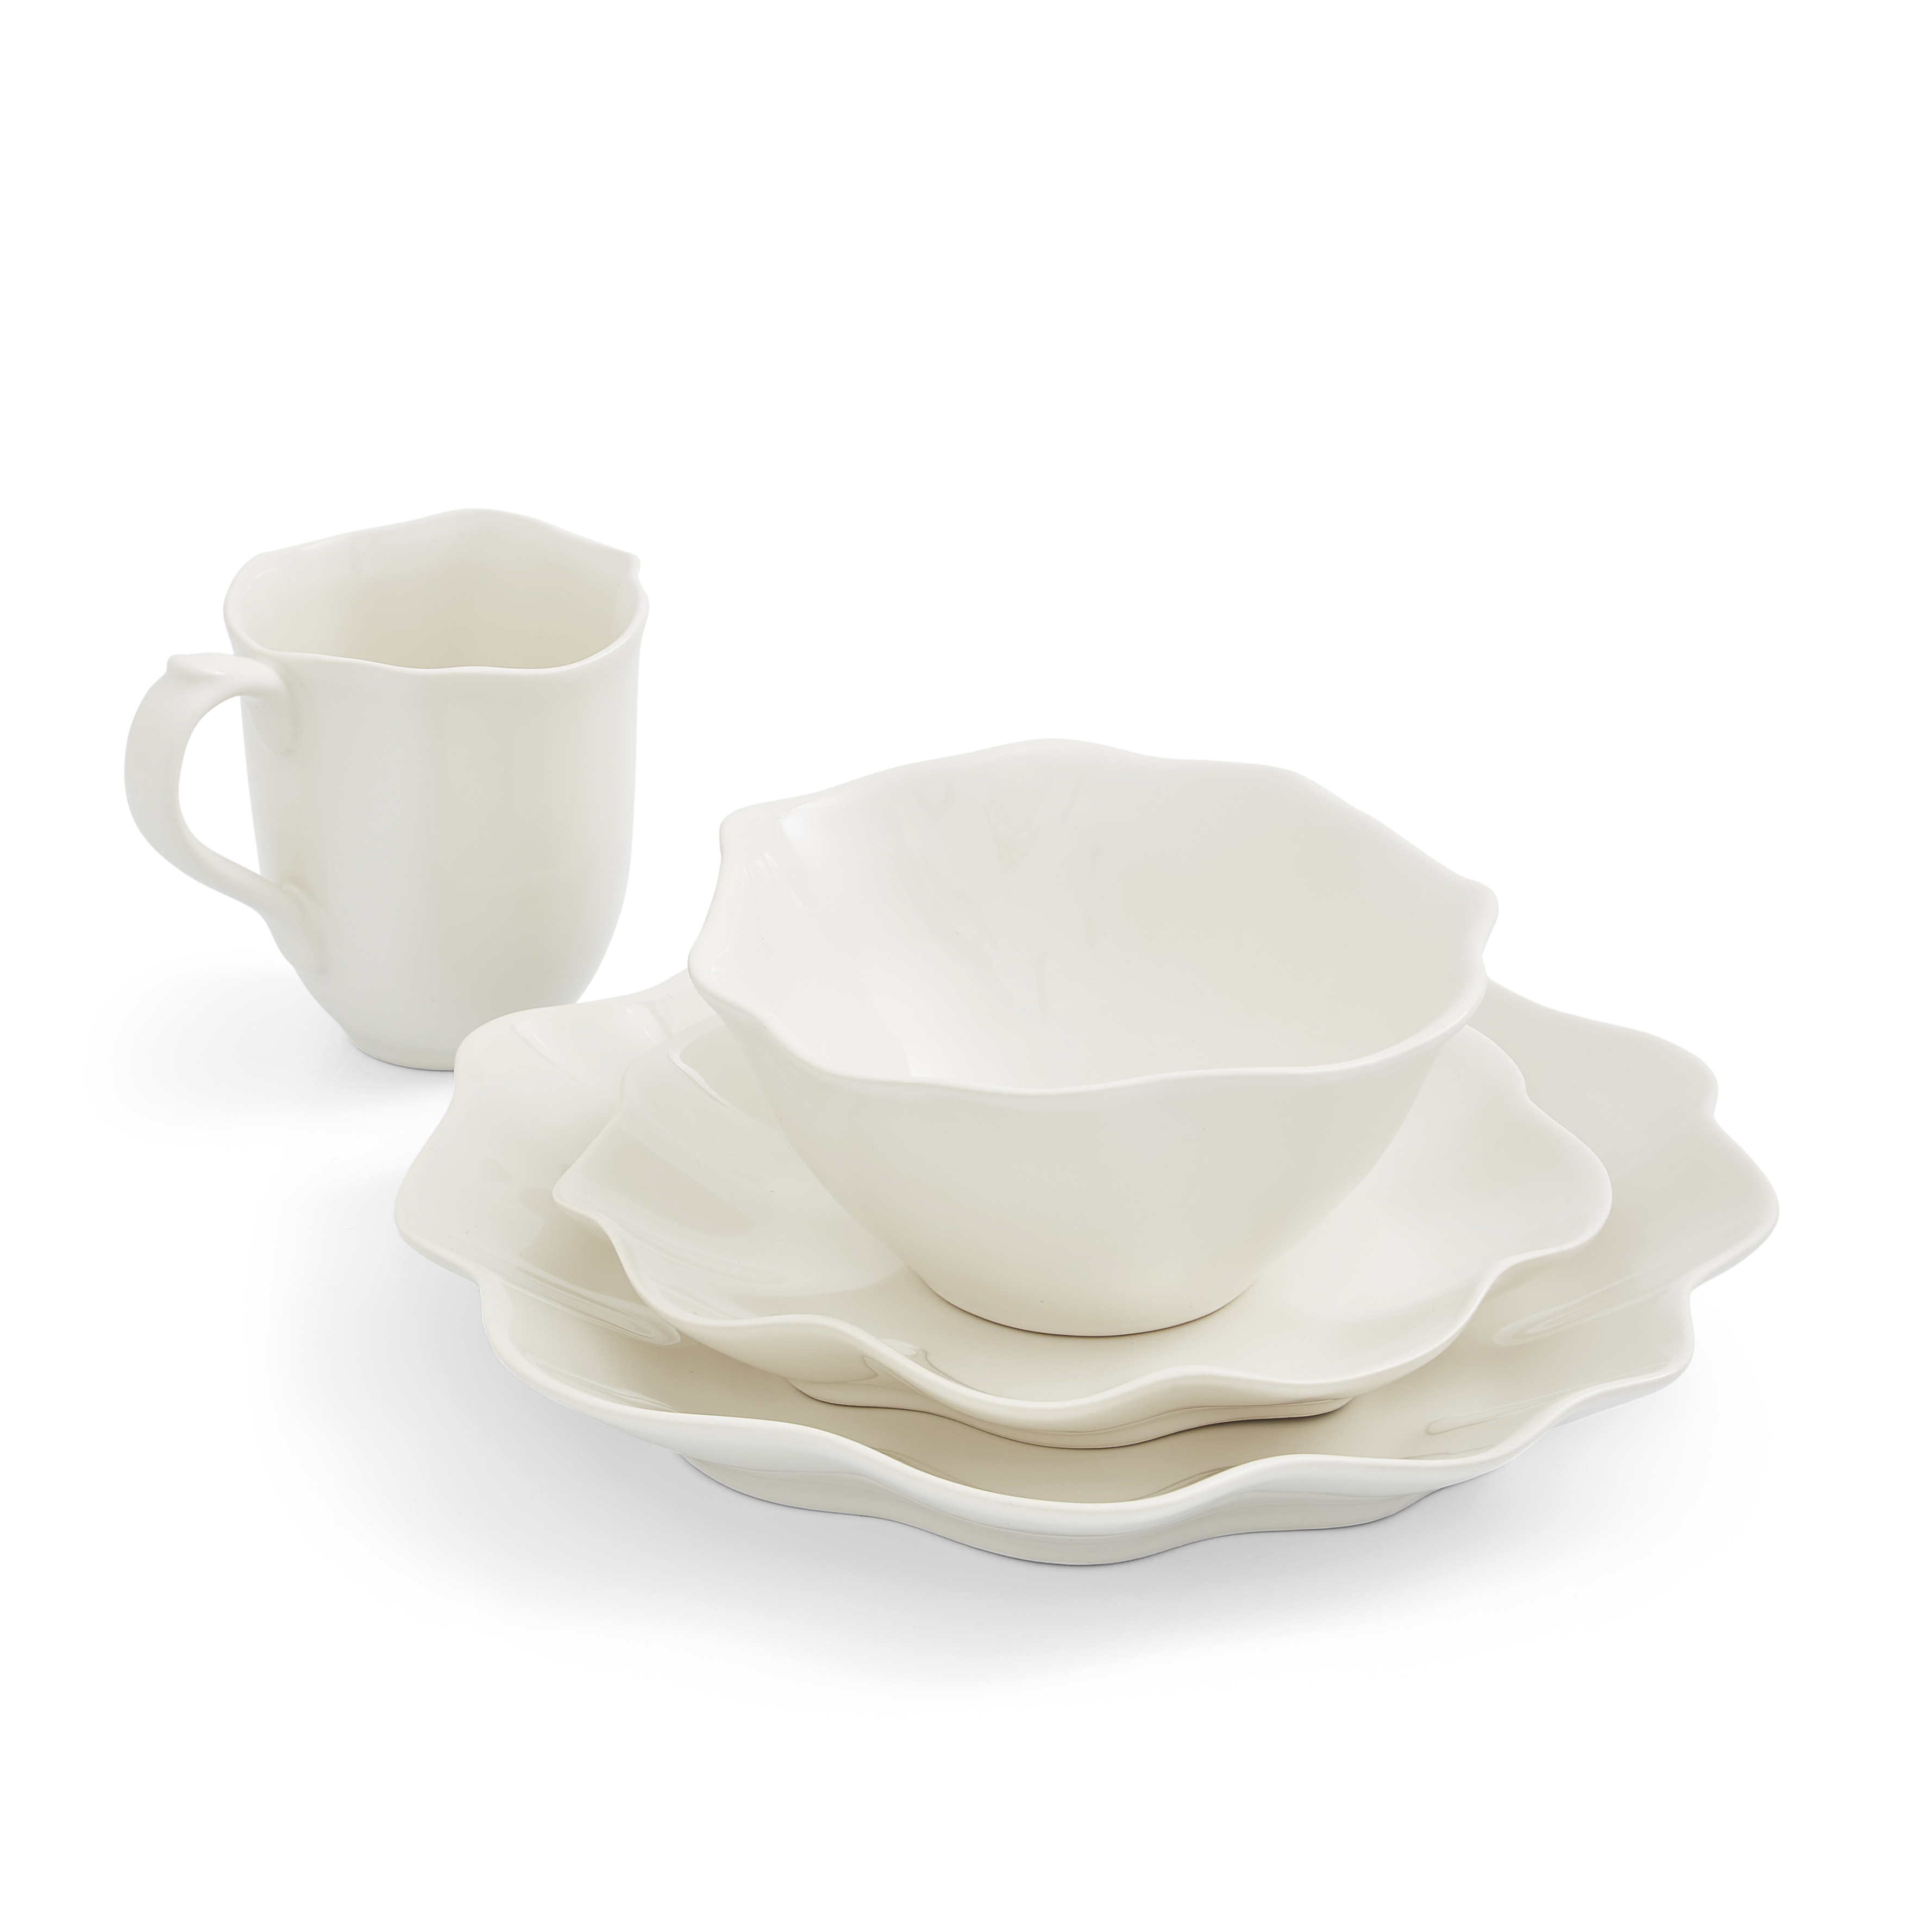 Sophie Conran Floret 4 Piece Place Setting, Cream image number null